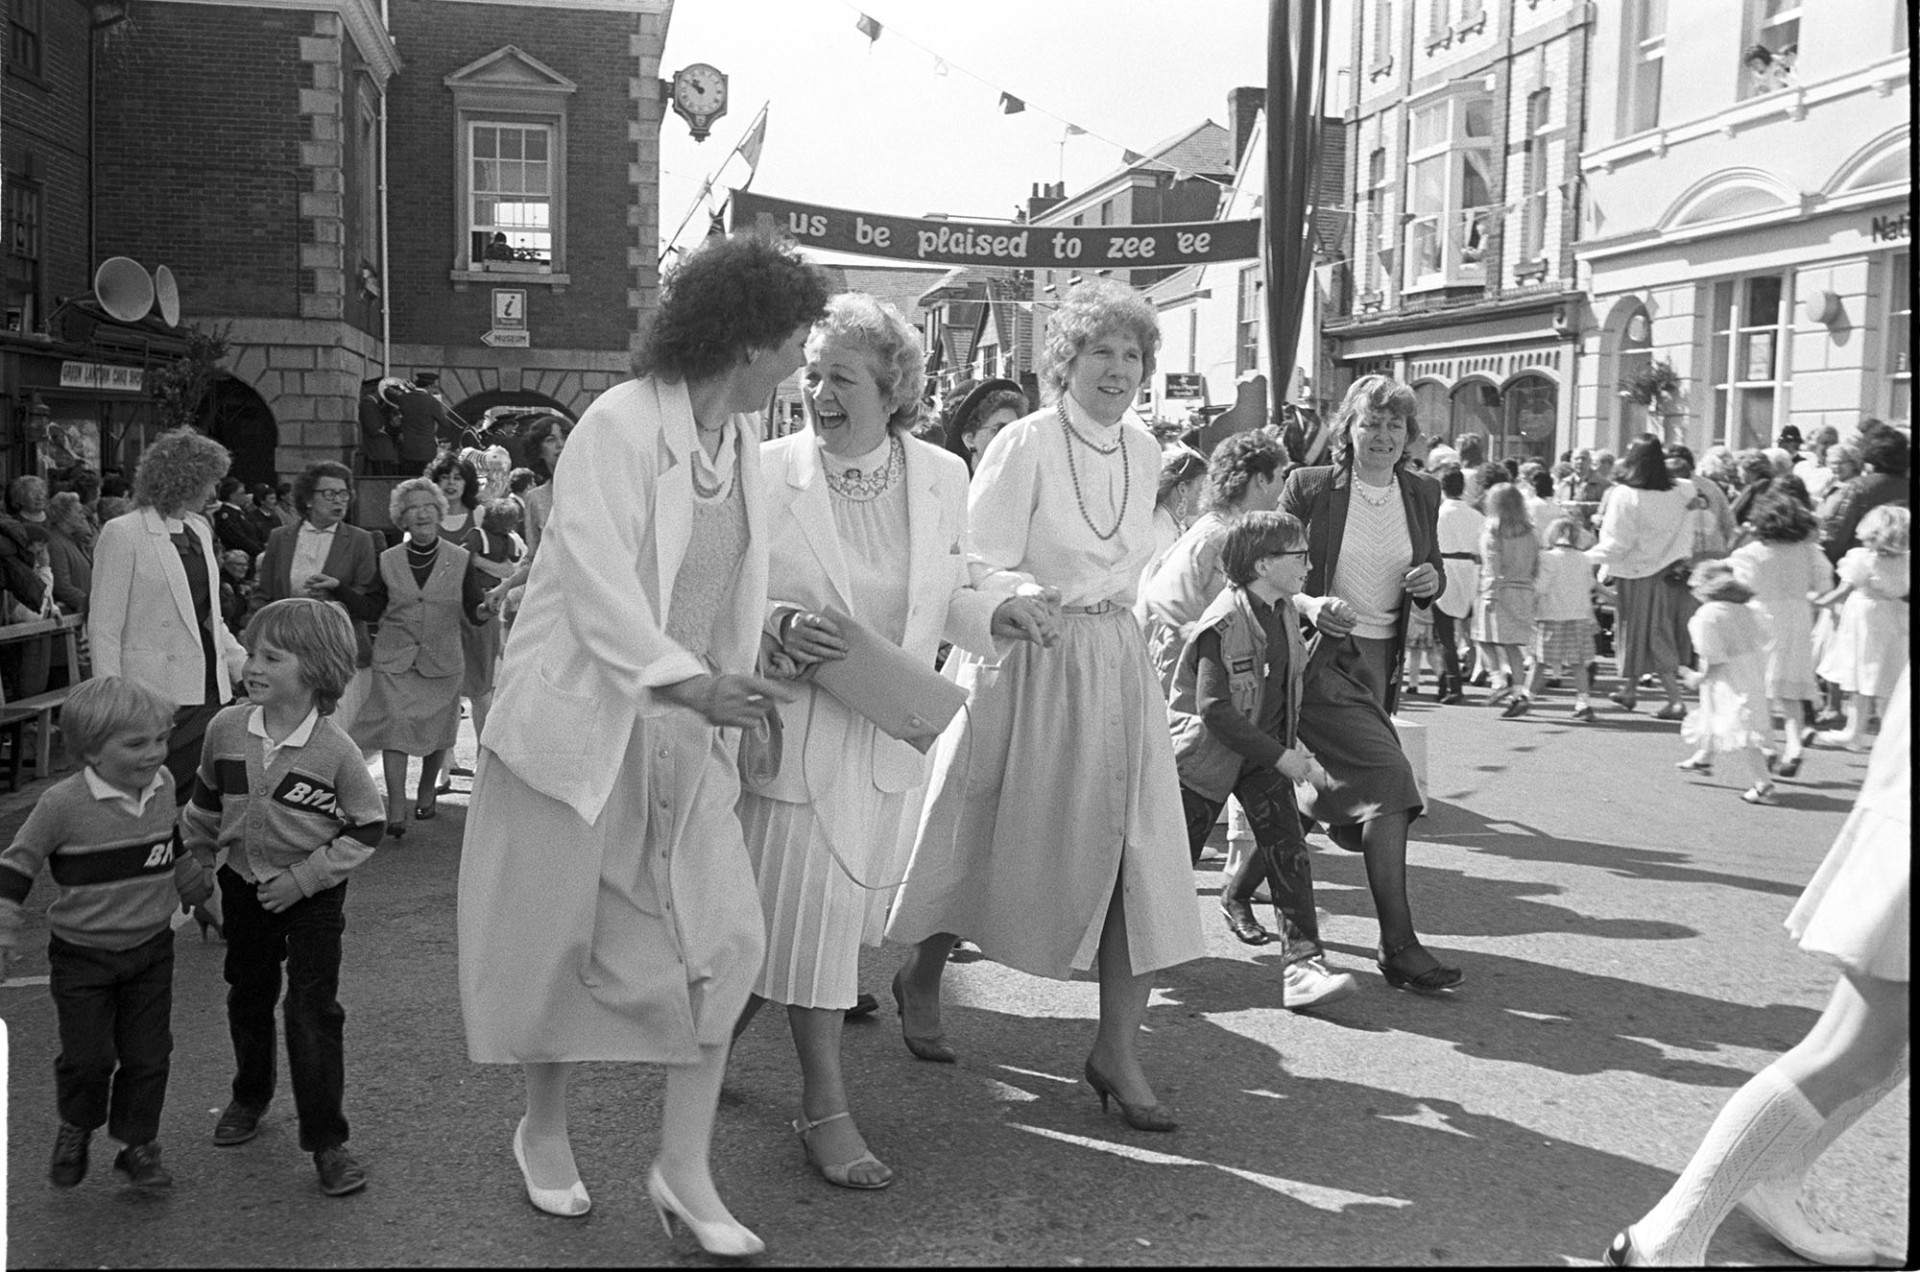 May Fair celebrations, dancing in the street, three women in summer dresses.
[Three women in summer clothes laughing and dancing in the High Street at the Great Torrington May Fair celebration. Stretched across the street is a banner reading 'Us be plaised to zee 'ee'. Other people are in the street watching the celebrations.]